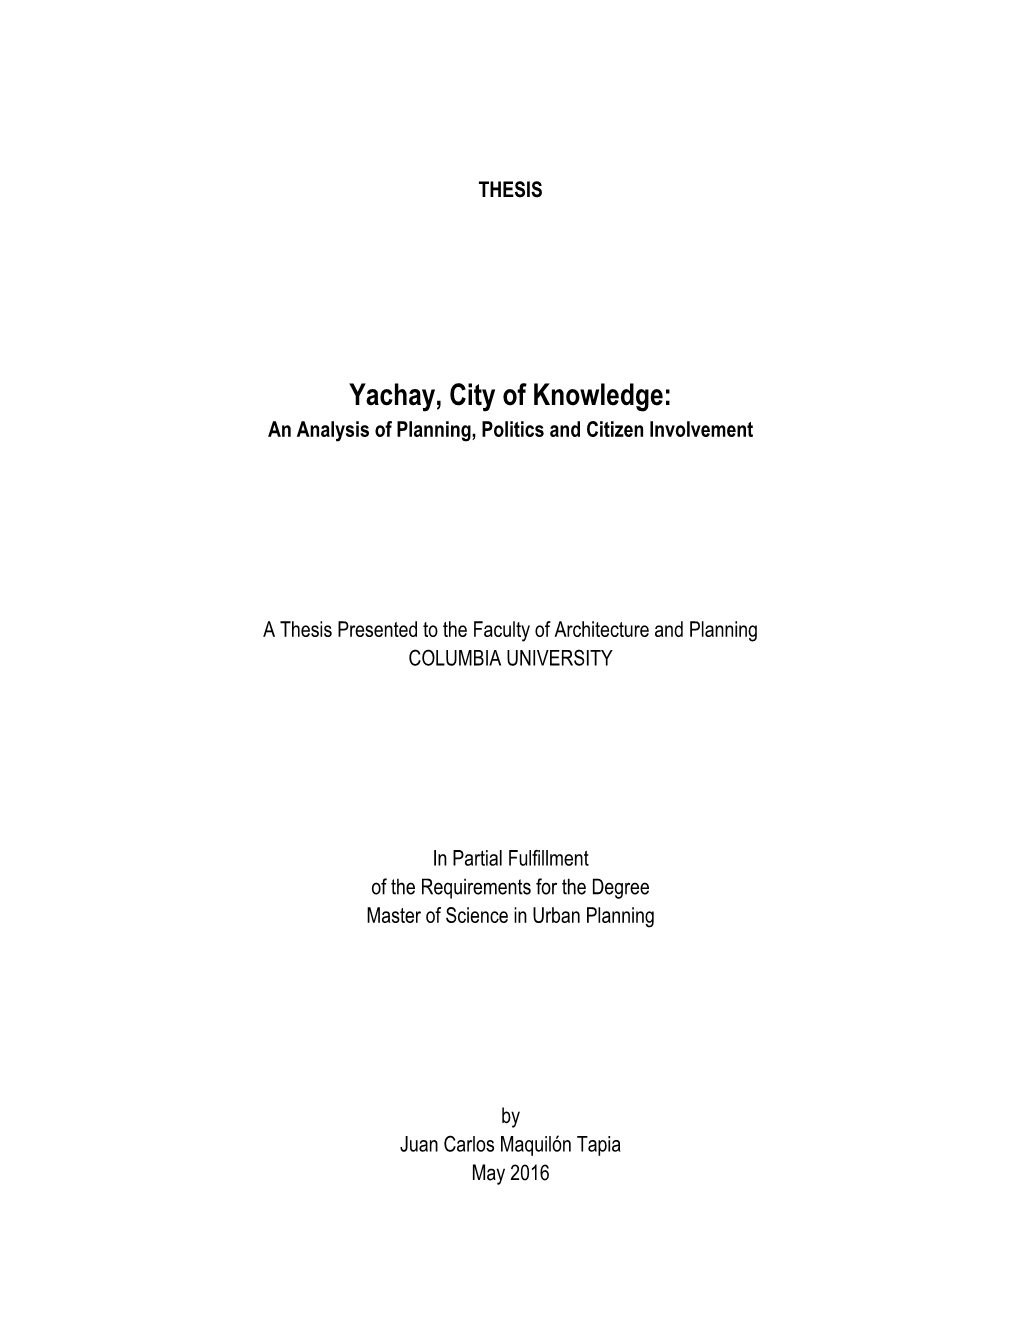 Yachay, City of Knowledge: an Analysis of Planning, Politics and Citizen Involvement